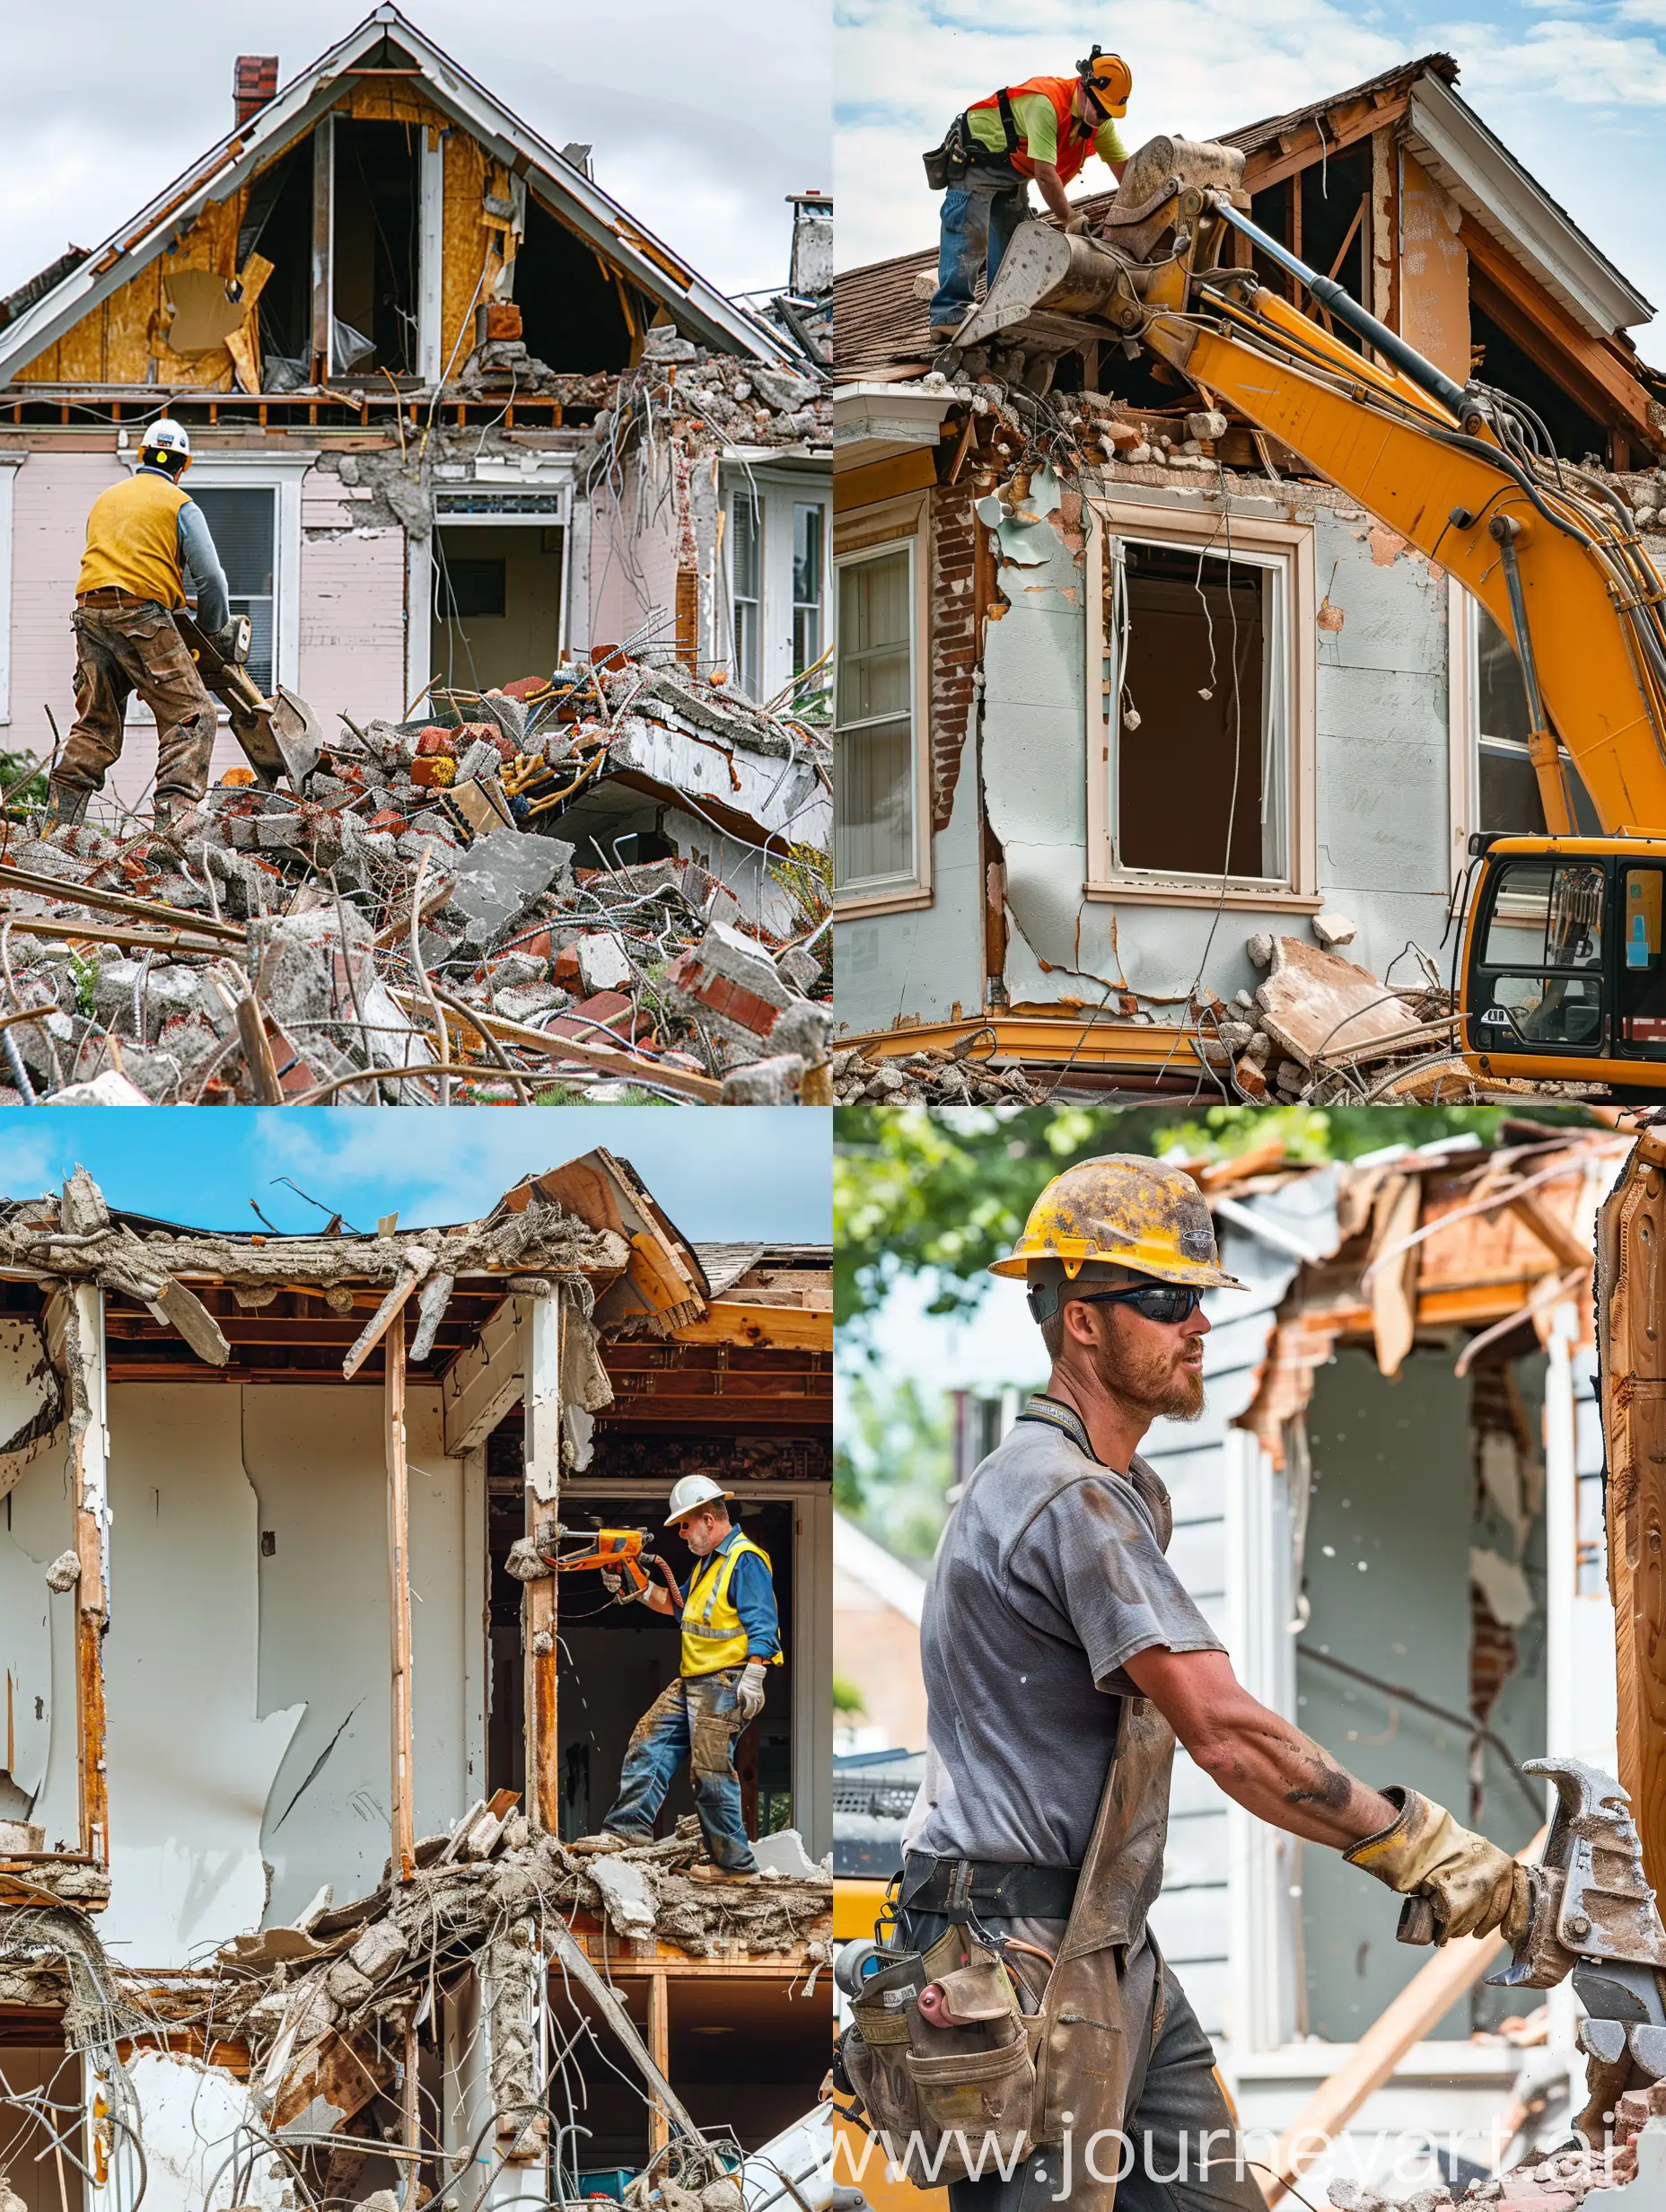 Realistic-Demolition-Worker-Tearing-Down-Old-House